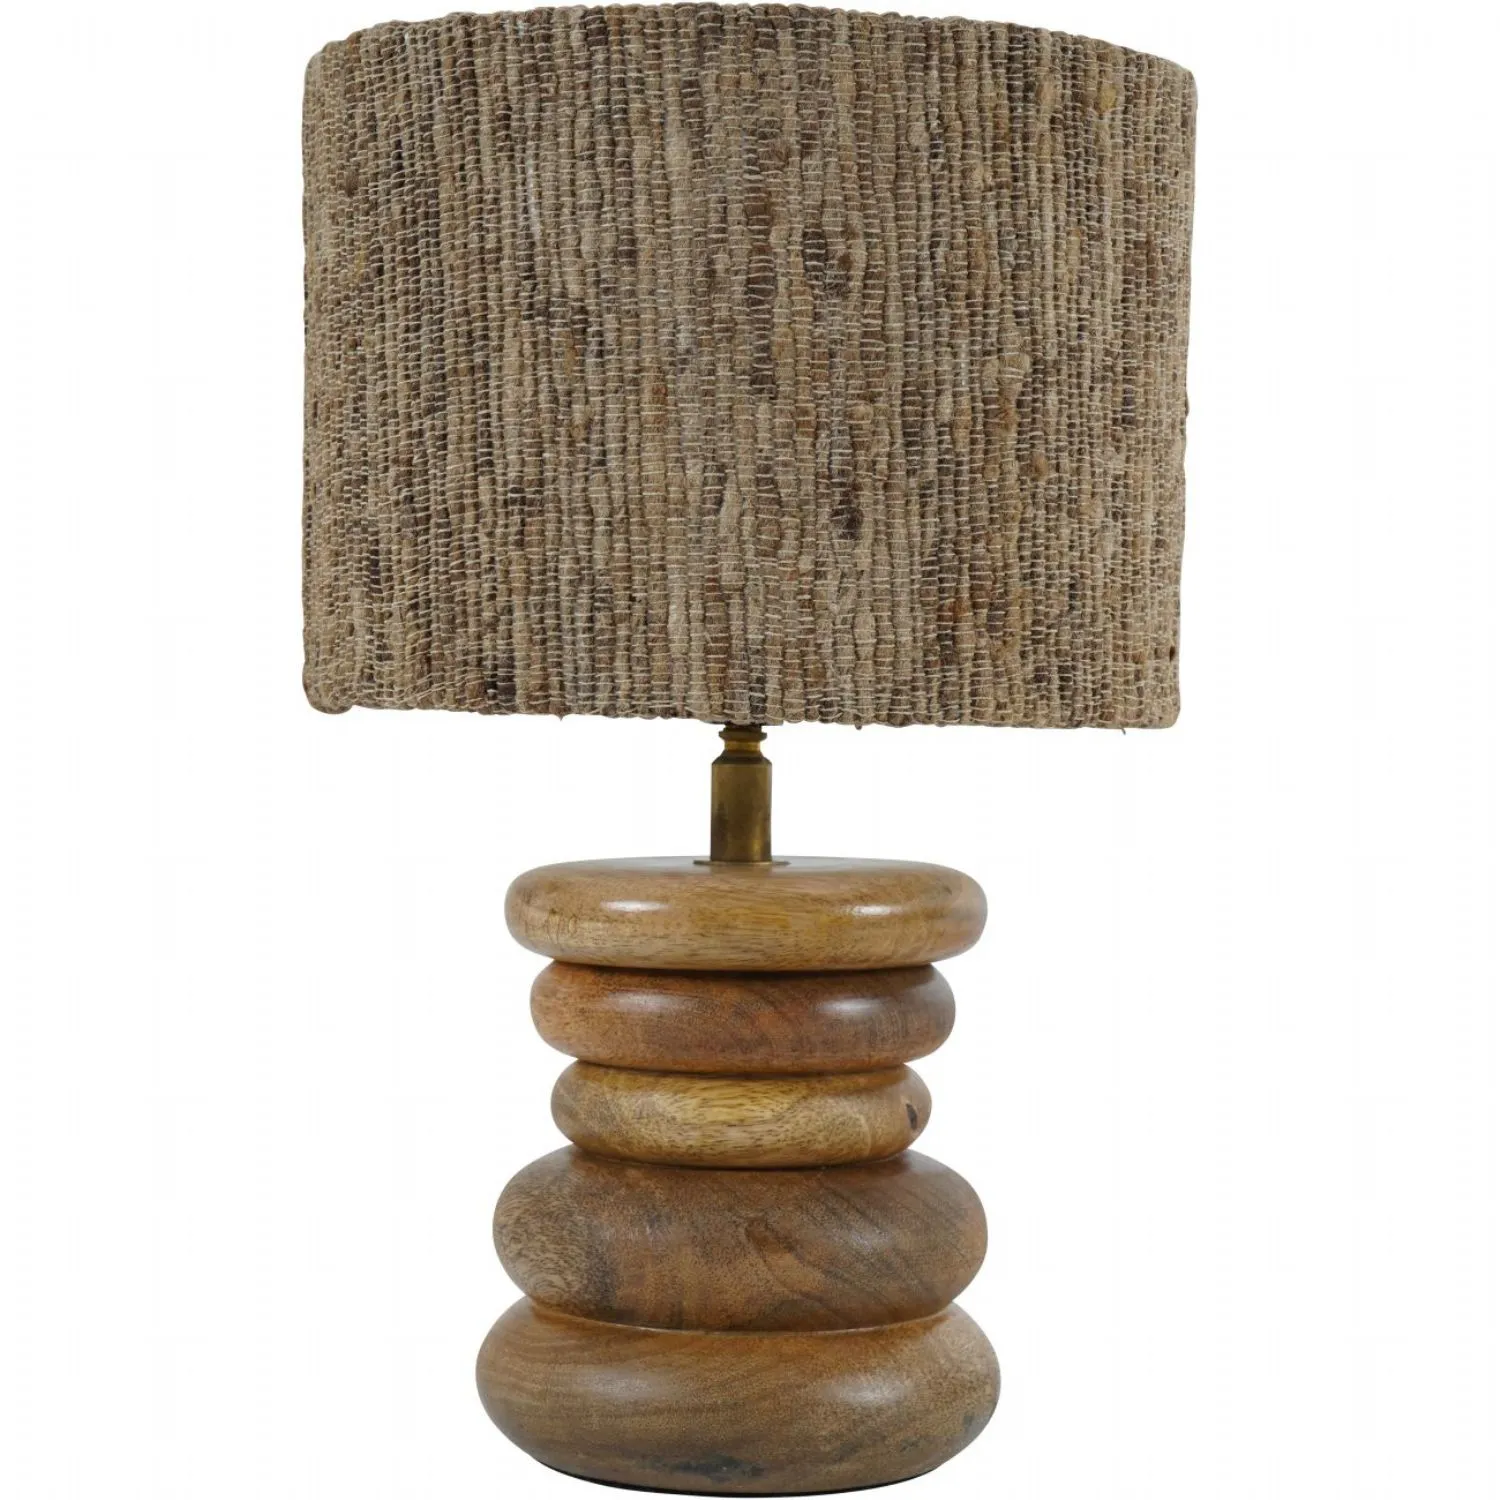 Leon Solid Wood Table Lamp with Silk Jute Shade Small